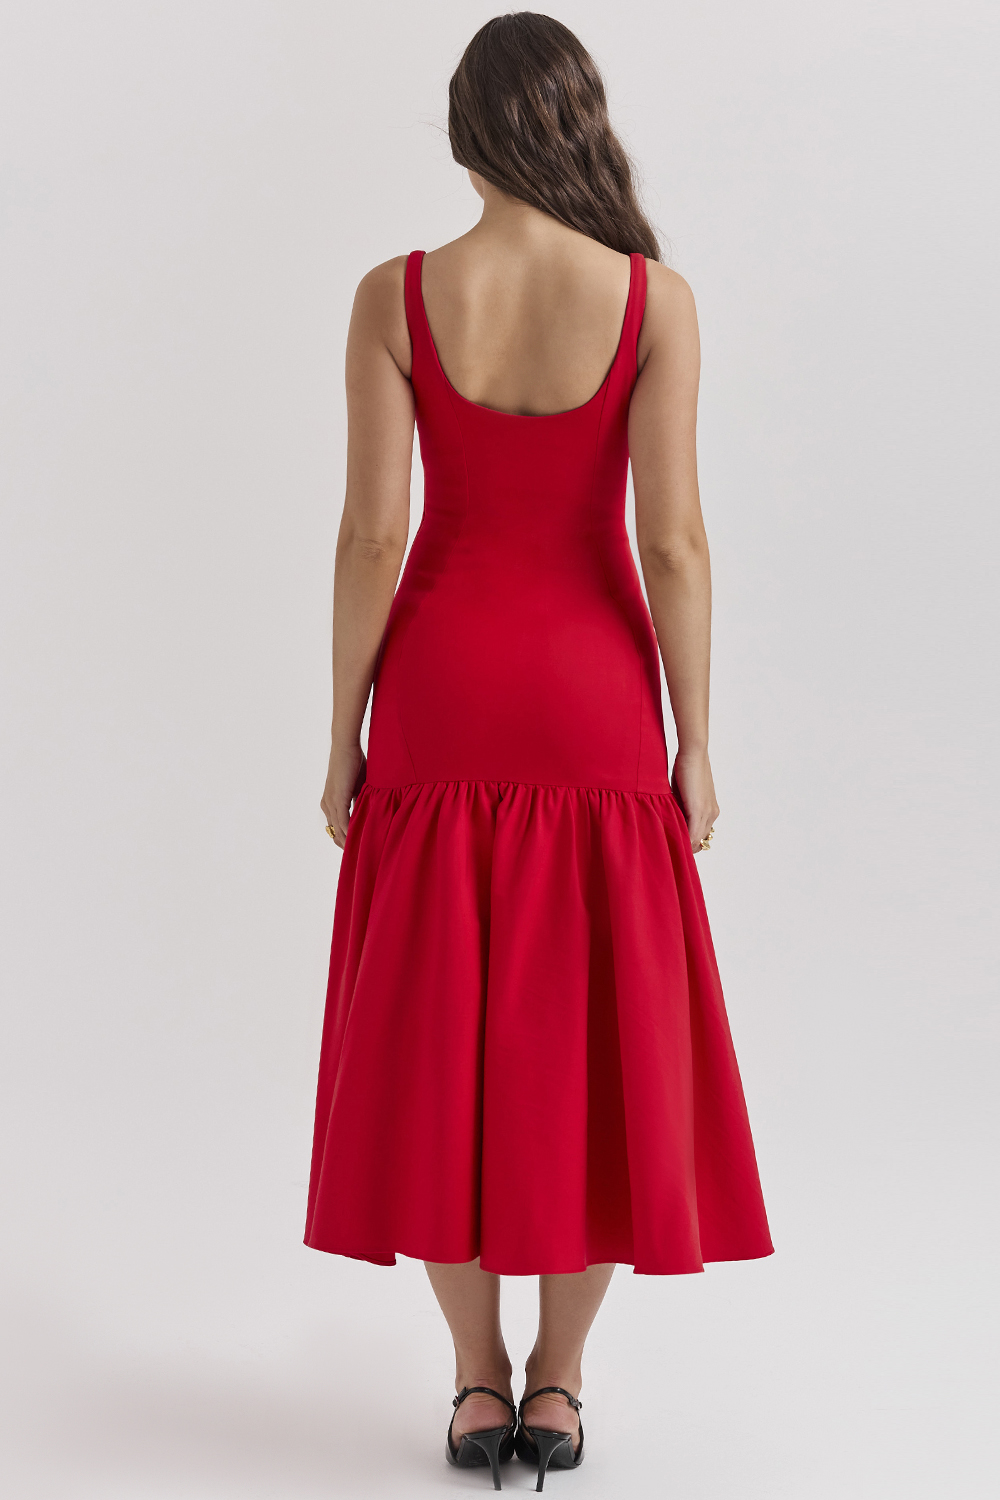 What's New : Clothing : 'Amore' Scarlet Midi Dress